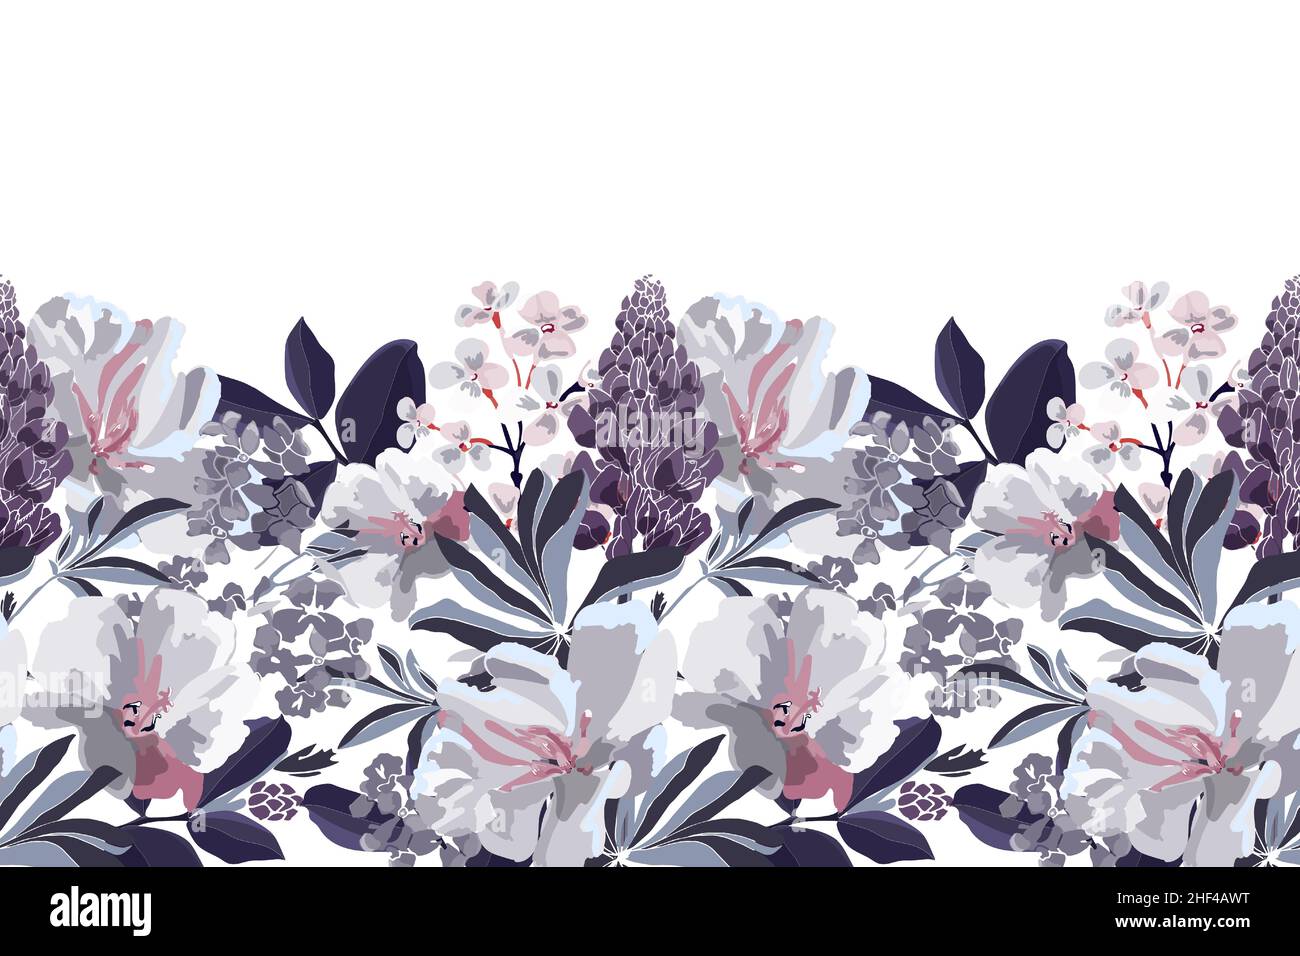 Vector floral seamless pattern, border. Horizontal panoramic design with flowers in grey white and lilac tones. Stock Vector